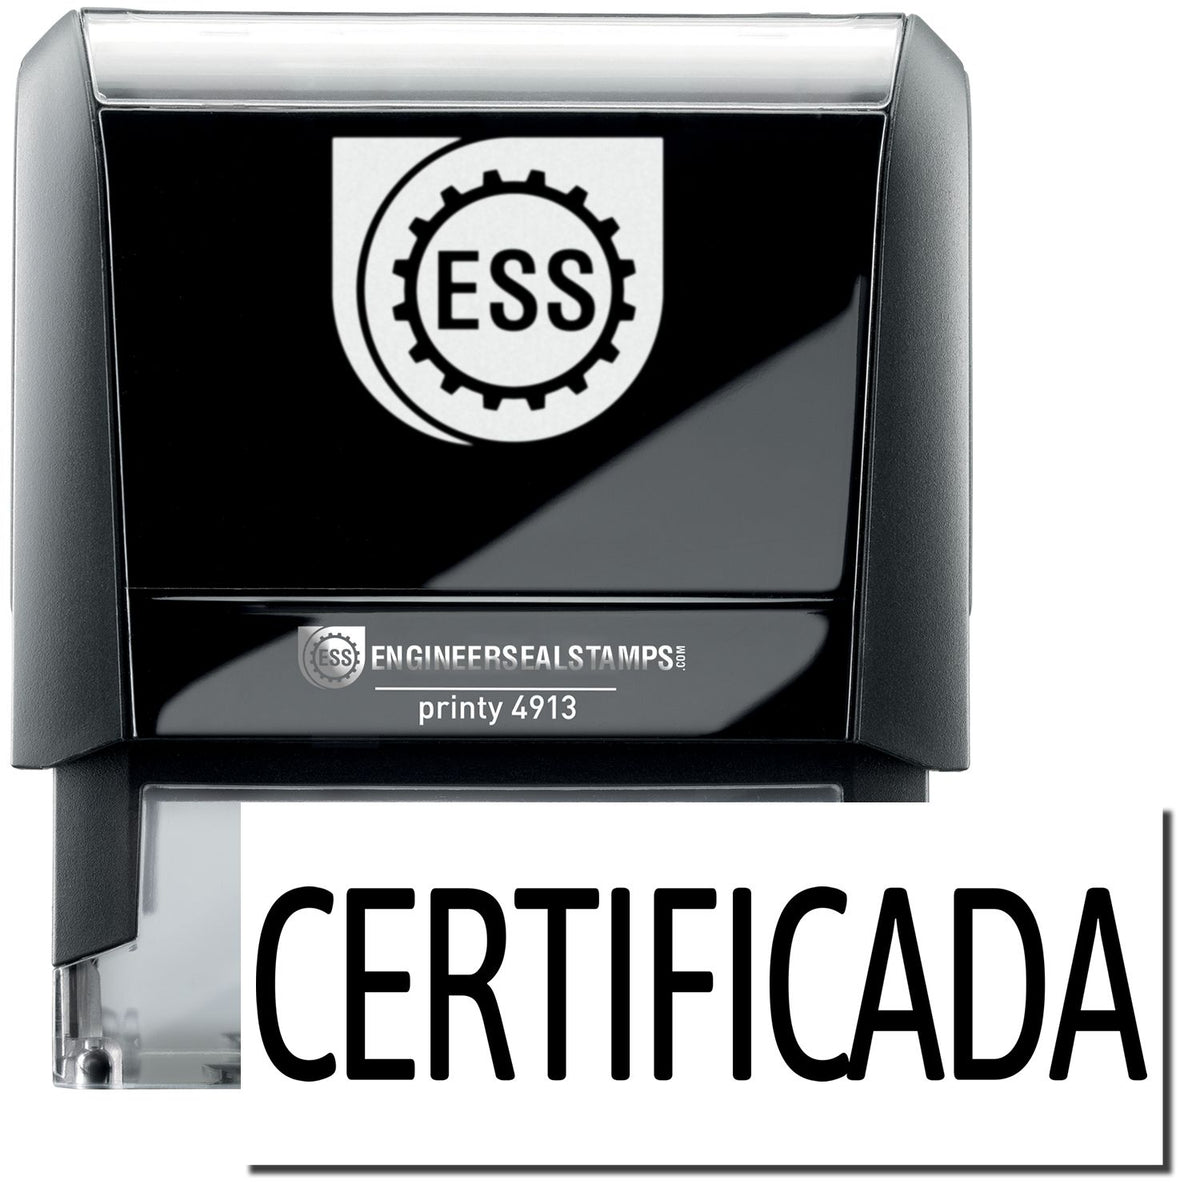 A self-inking stamp with a stamped image showing how the text &quot;CERTIFICADA&quot; in a large font is displayed by it after stamping.